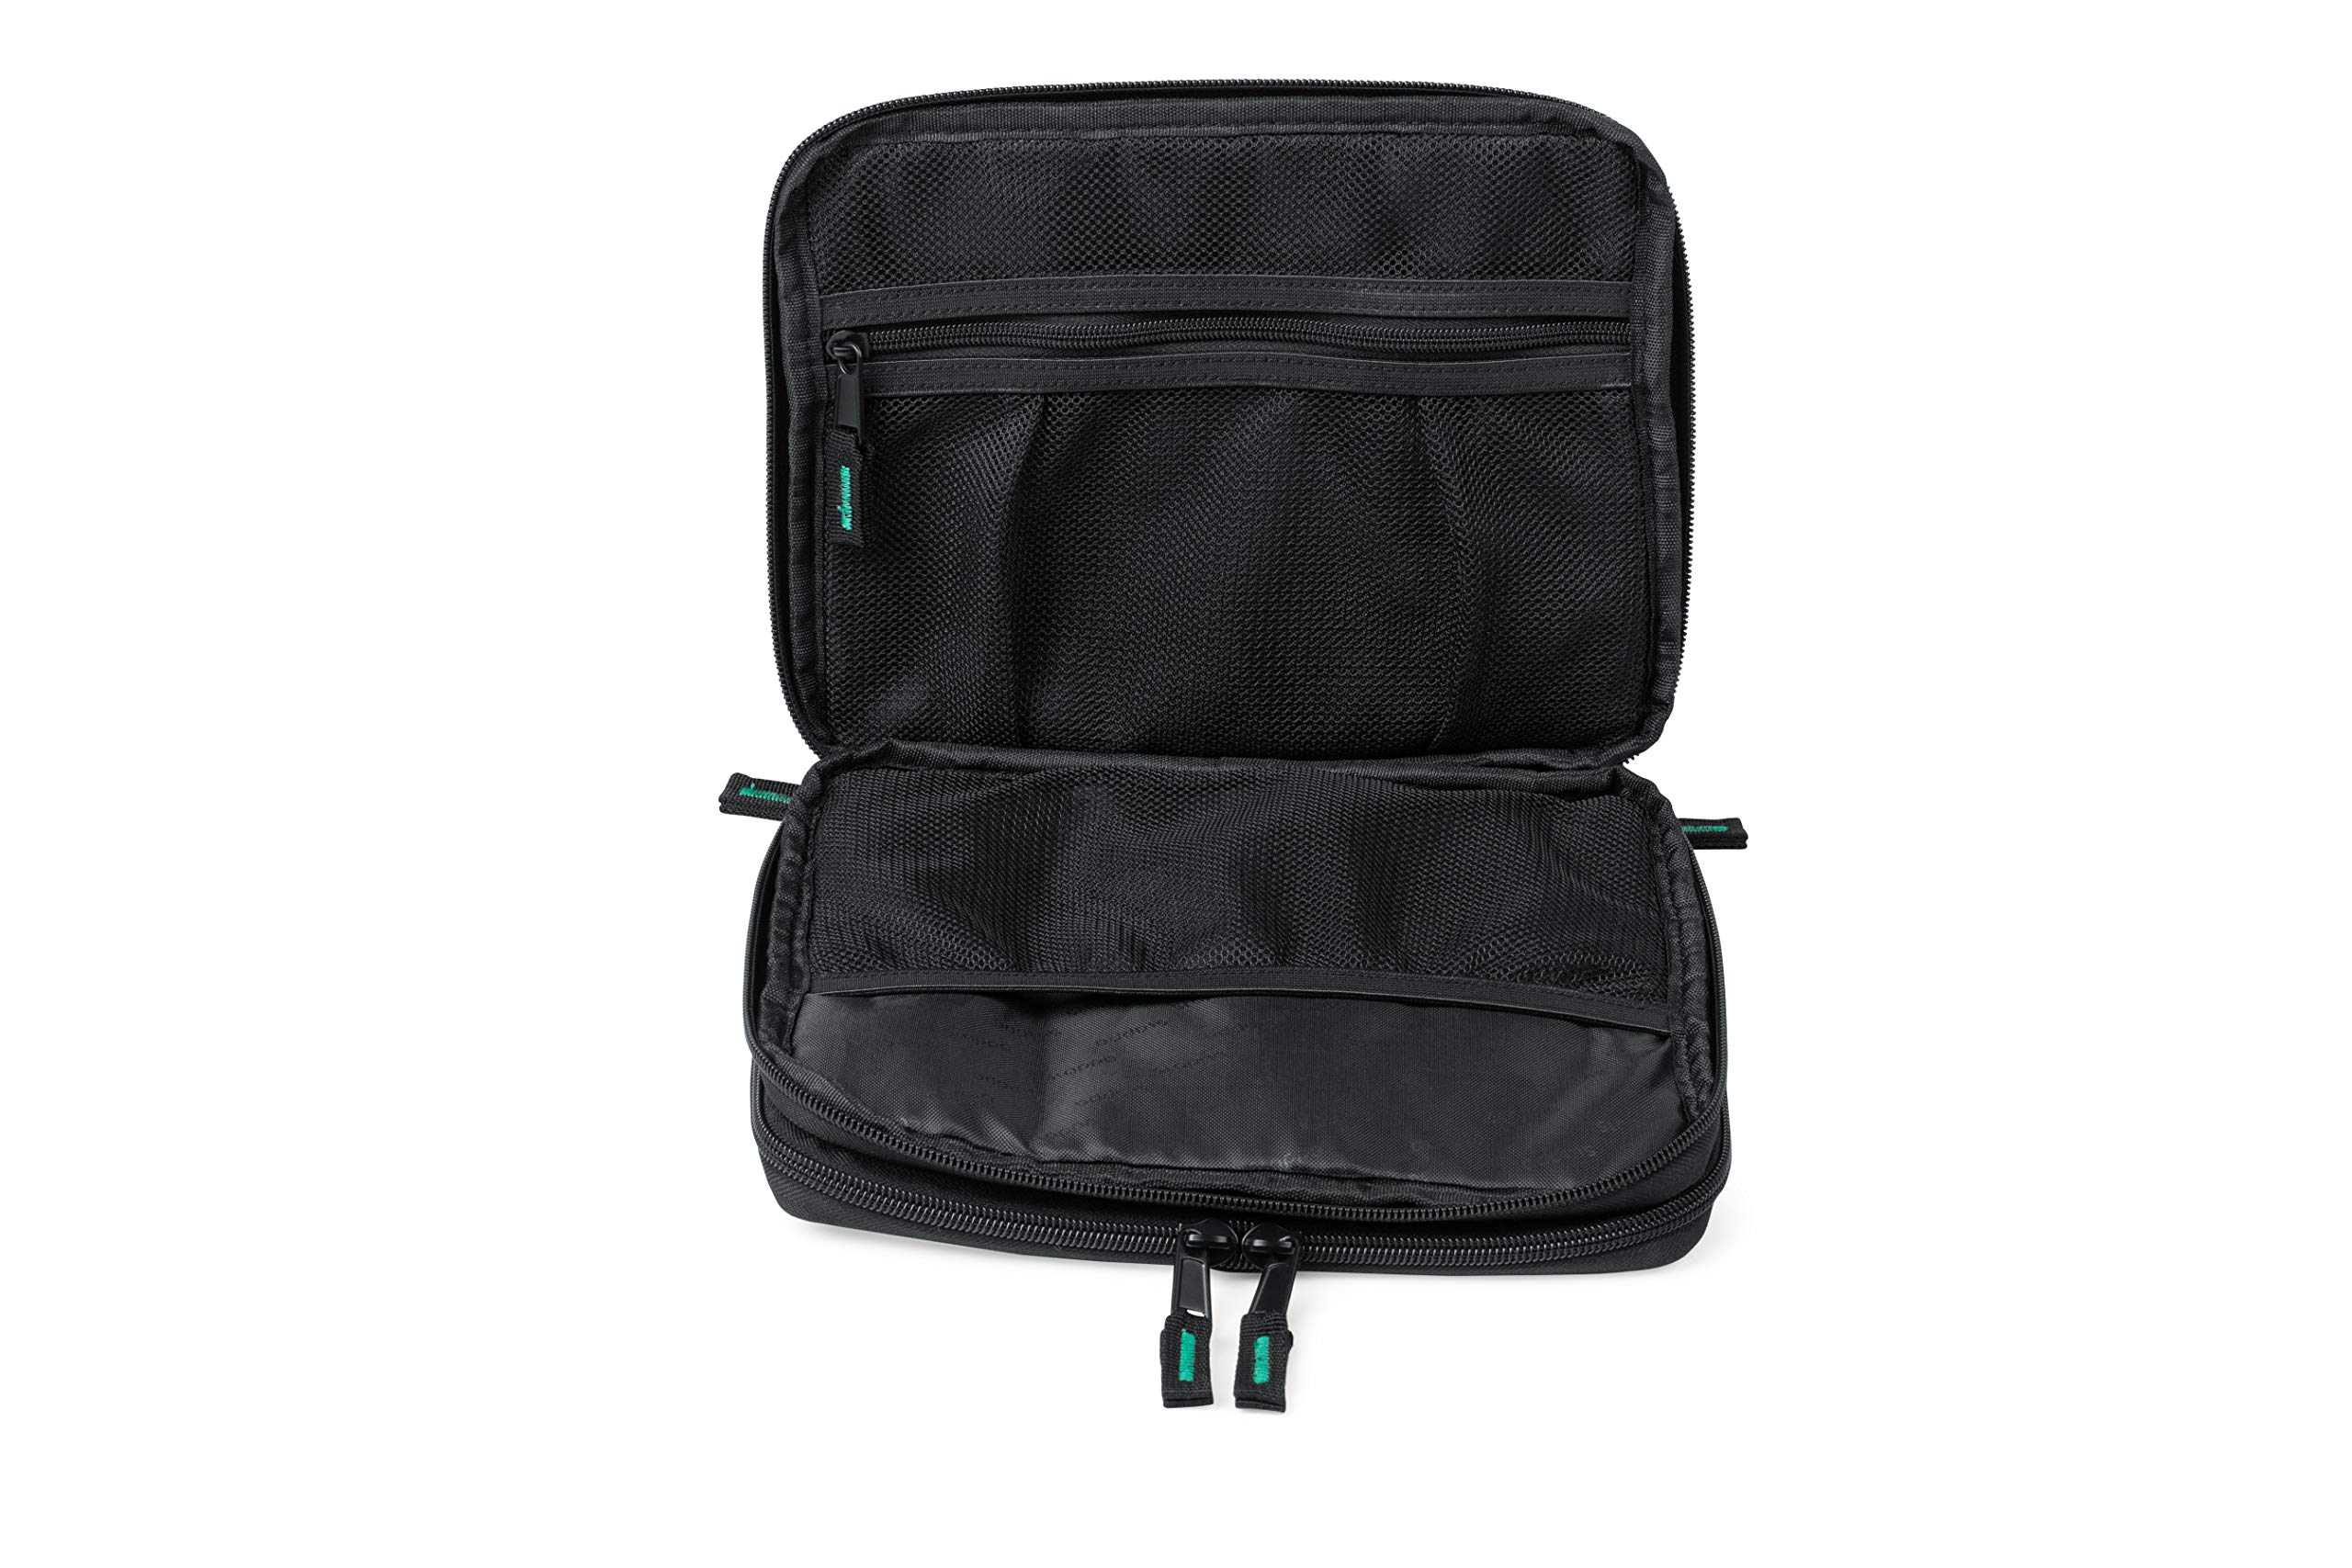 Slappa Travel Organizer for Electronic Devices, Charging Cables & Accessories; Size - Small (SL-TRAVELORGANIZER-SM)